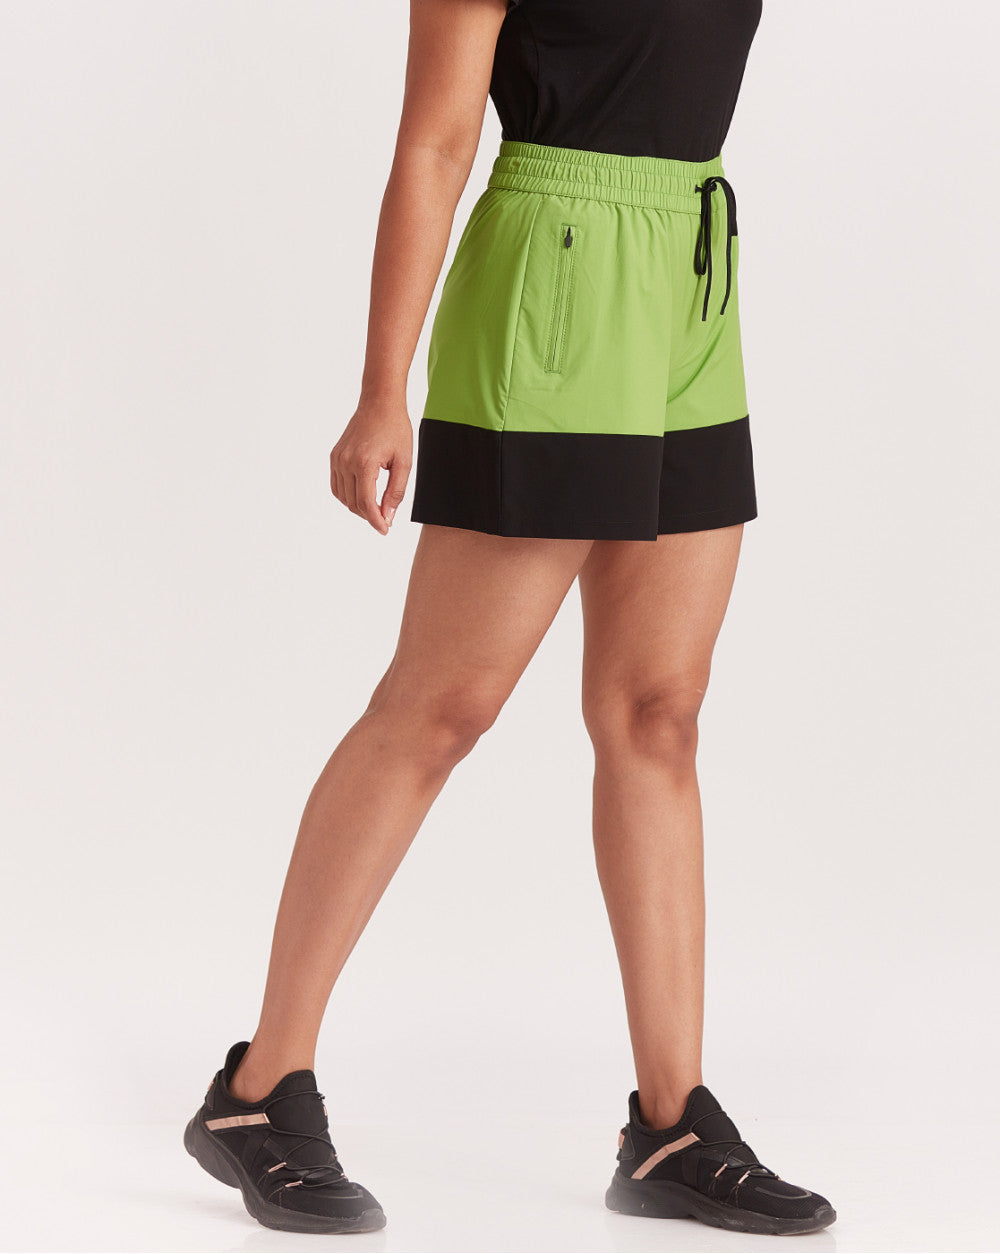 Mid Rise Color Block Shorts - Cyber Green